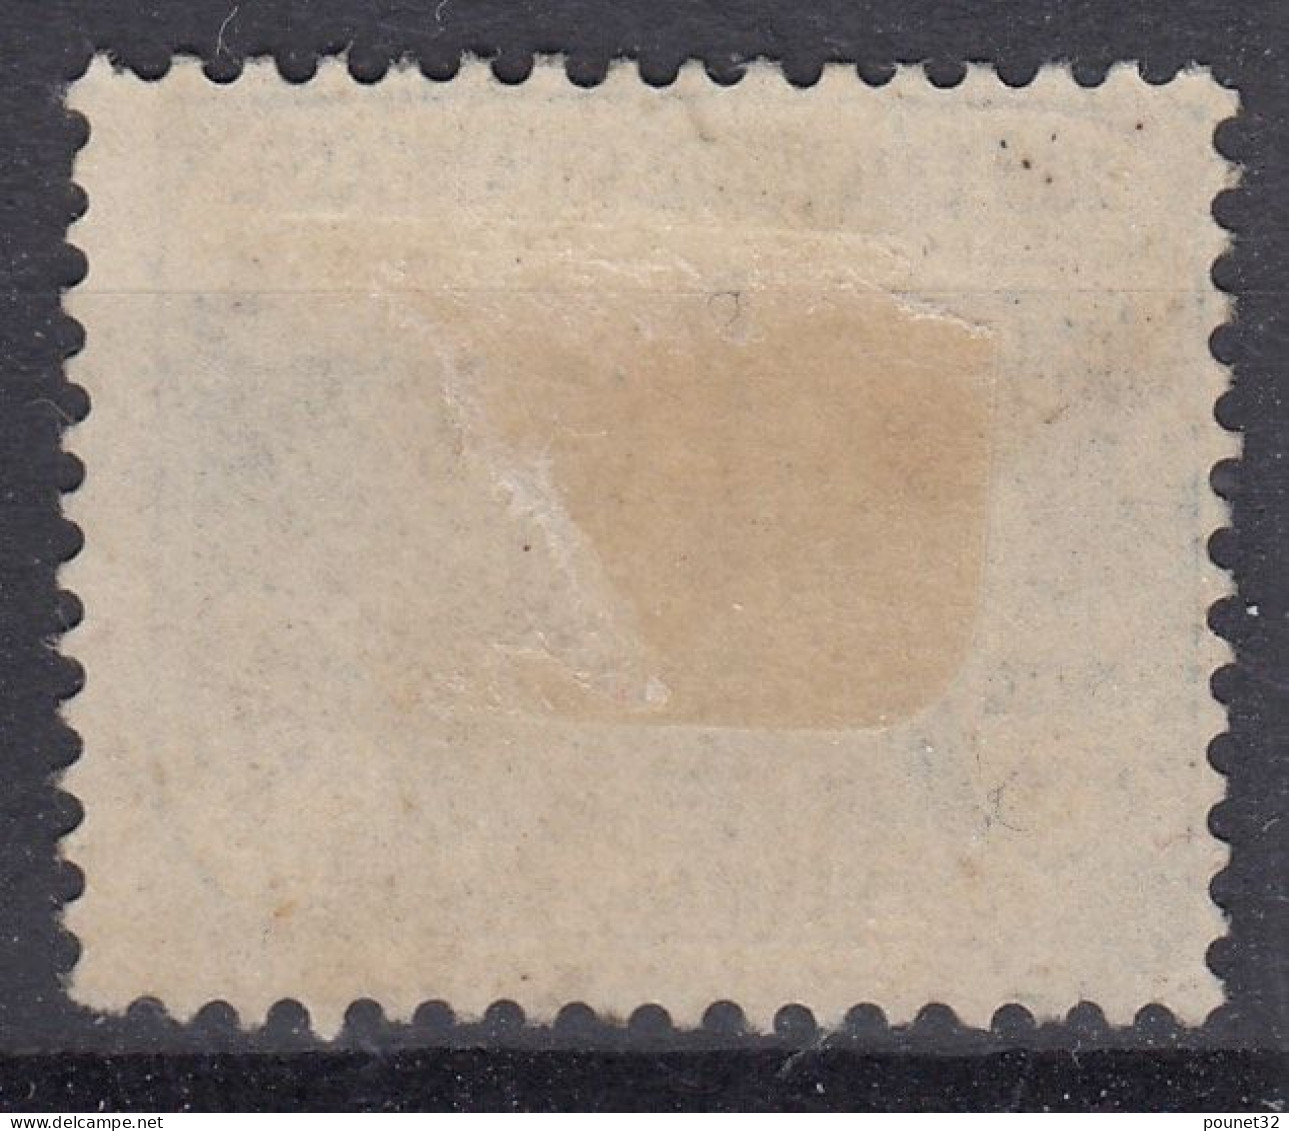 TIMBRE FRANCE 1ère ORPHELIN N° 151 OBLITERATION TRES LEGERE - COTE 65 € - Gebraucht